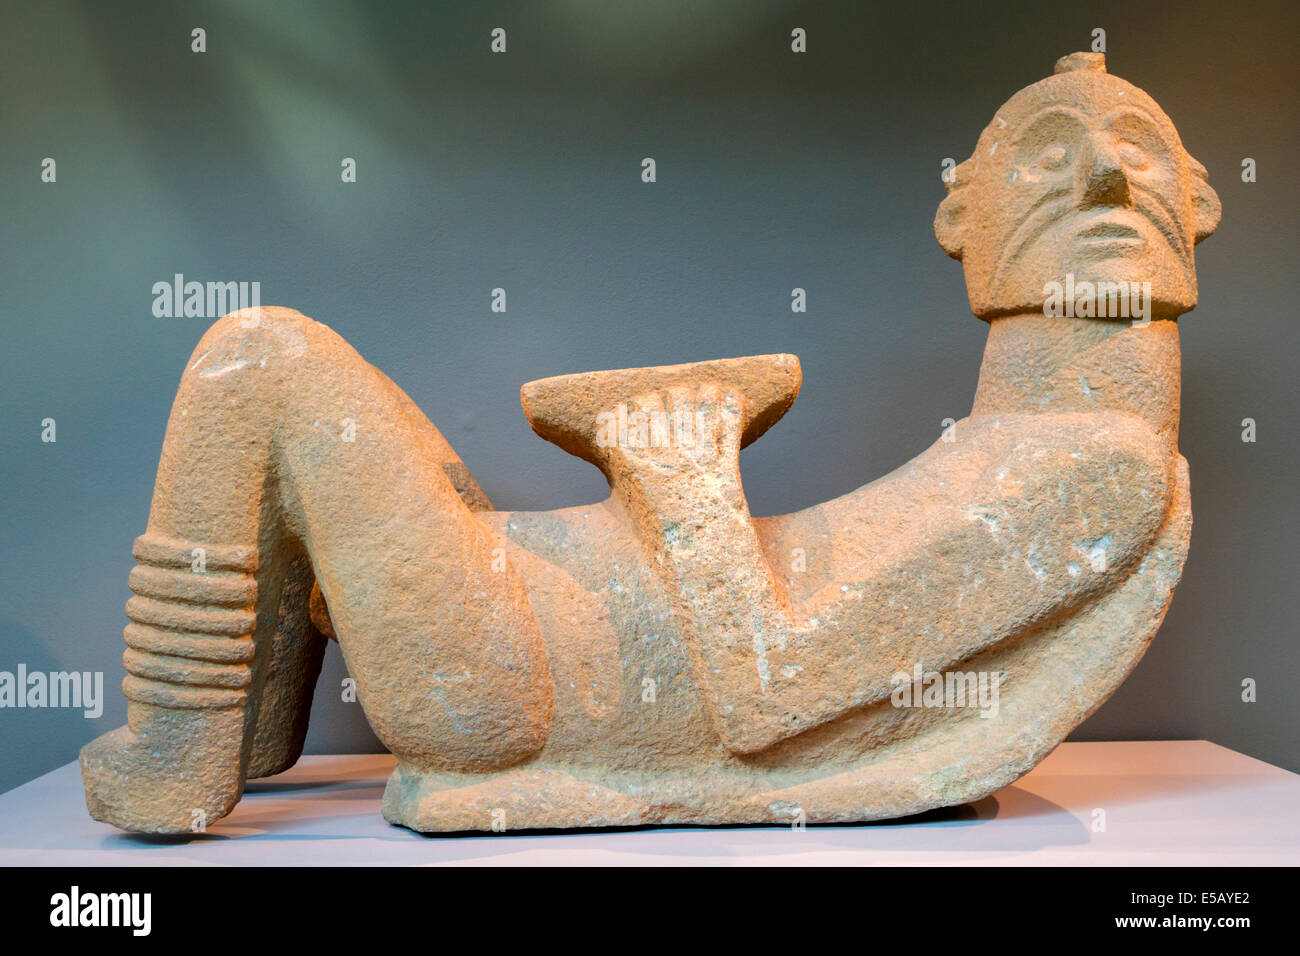 Melbourne Australia,Southbank,St. Kilda Road,National Gallery of Victoria,art,museum,Chacmool,sculpture,stone,Mayan,Tarascan Mexico,reclining figure,A Stock Photo